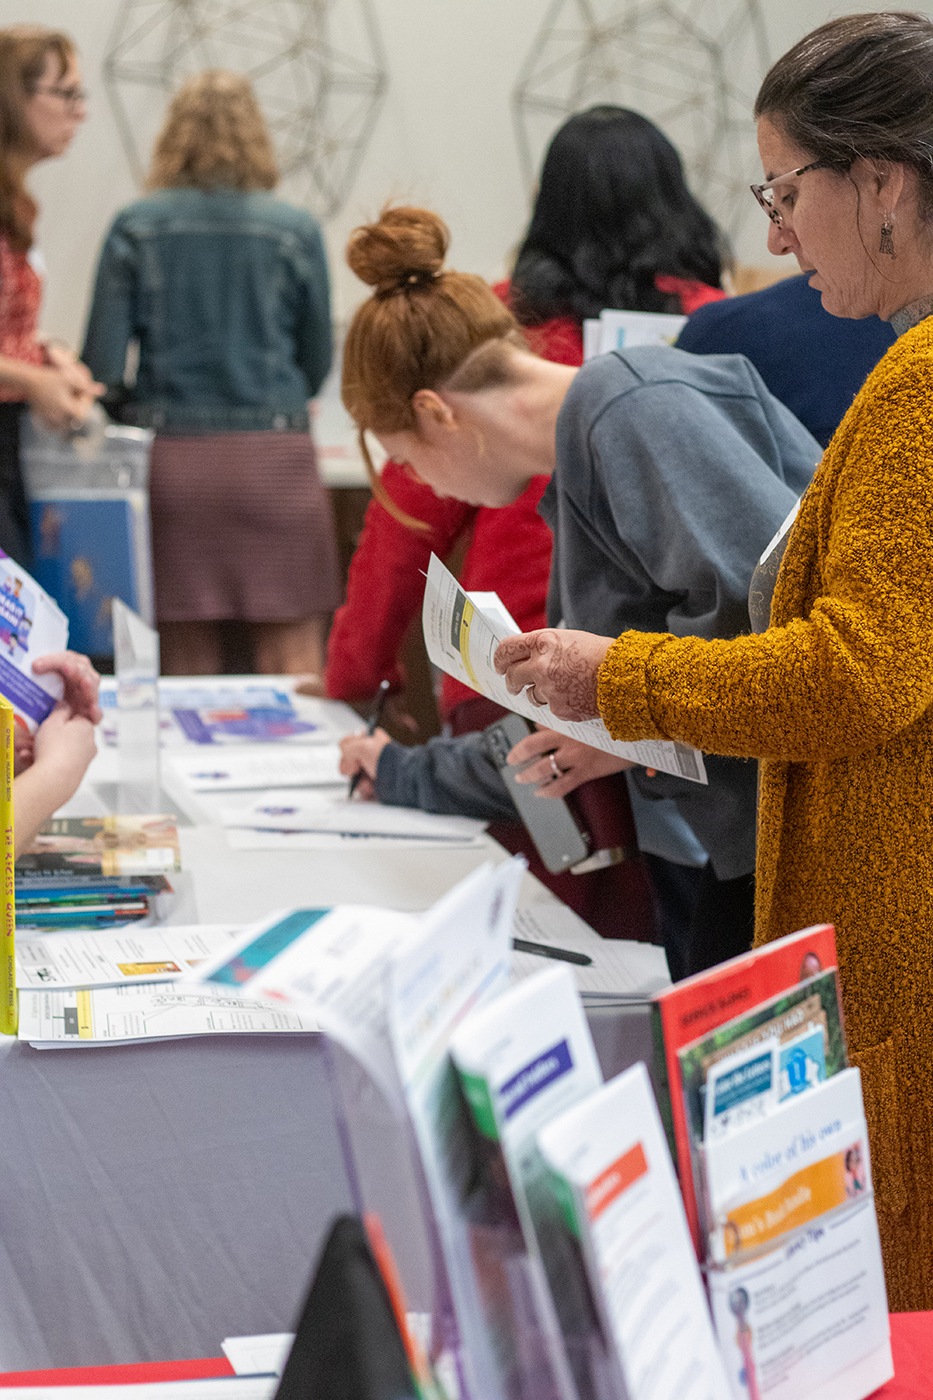 Attendees examine handouts at tables in an exhibition hall during the 2023 Crane Symposium on Children.